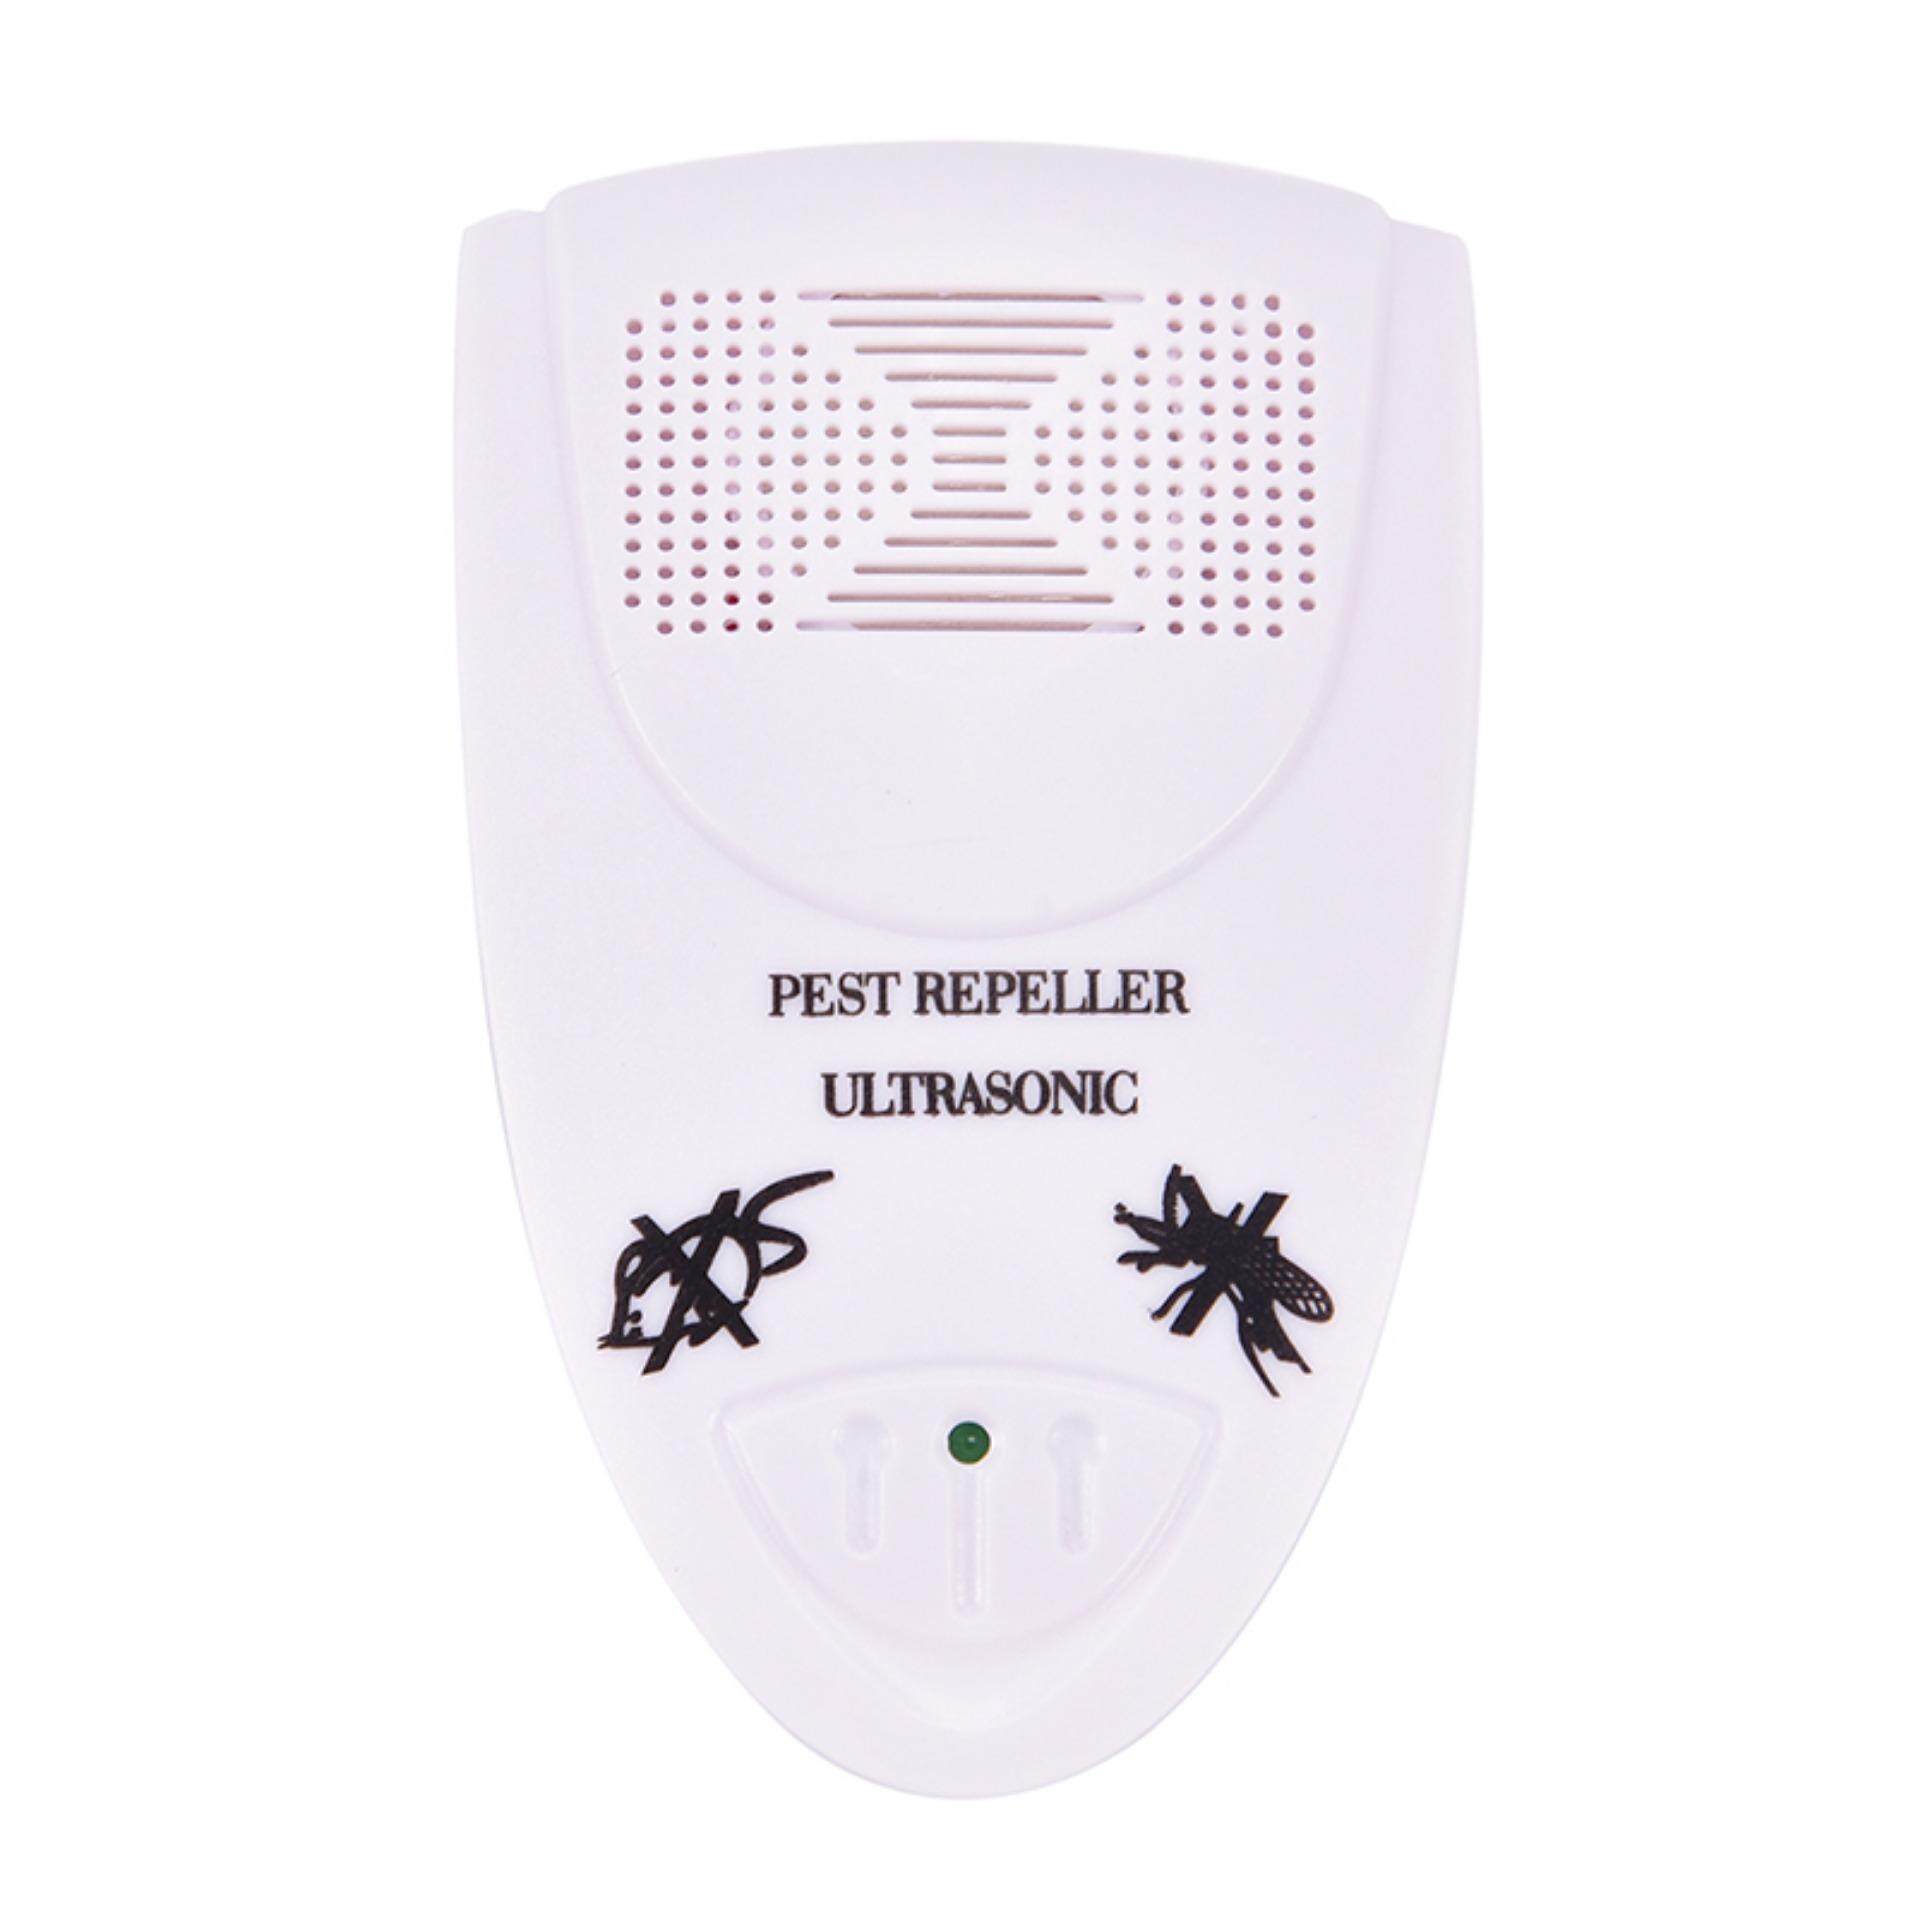 Ultrasonic Electronic Pest Repeller Indoor Bug Mice Roach Spiders Insects Killer